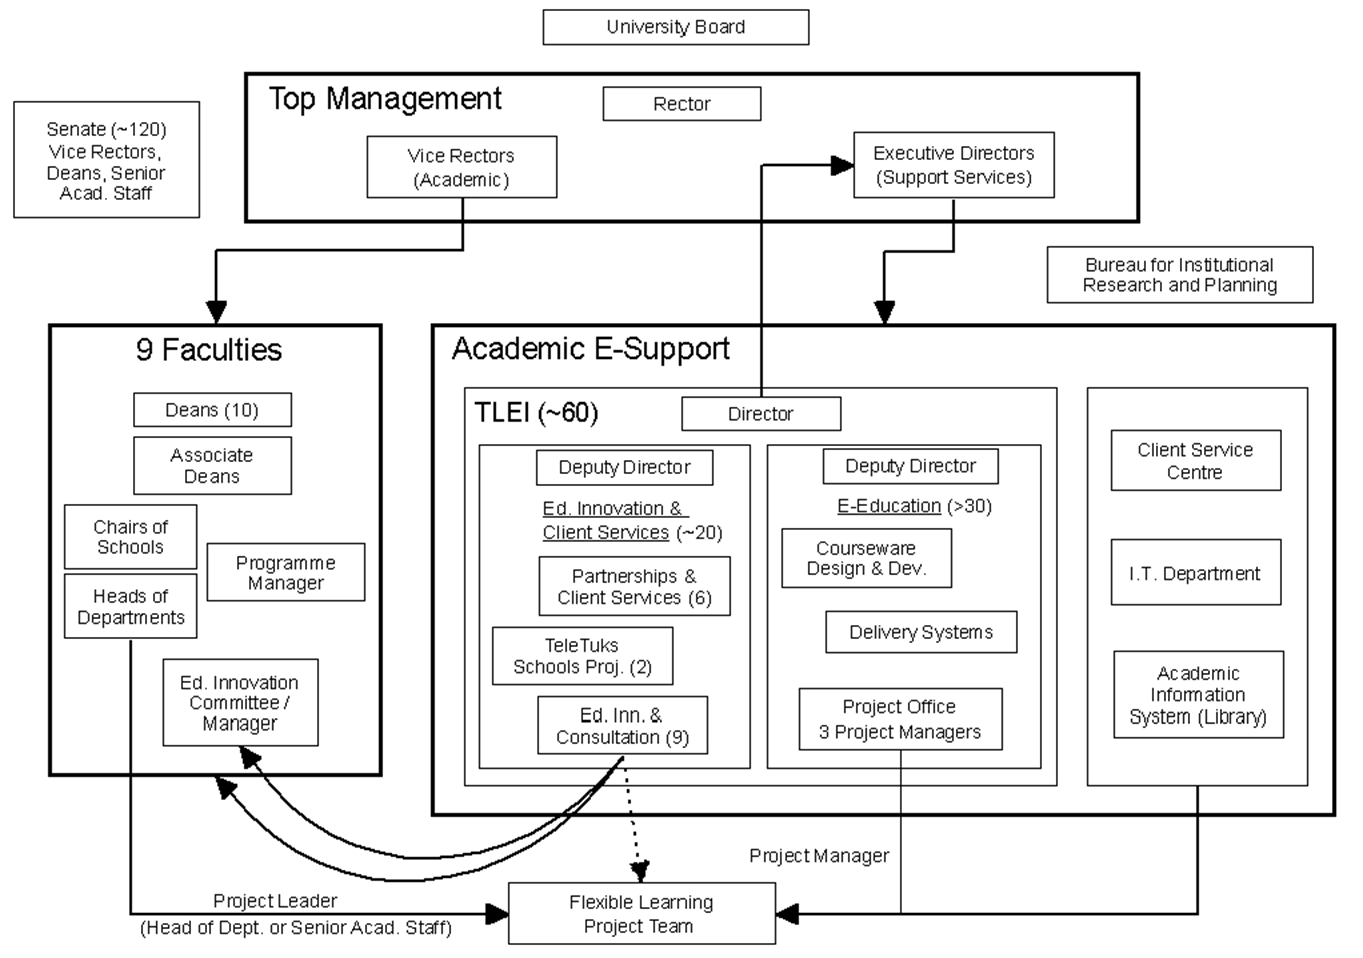 Organisational structure of the University of Pretoria and academic support units